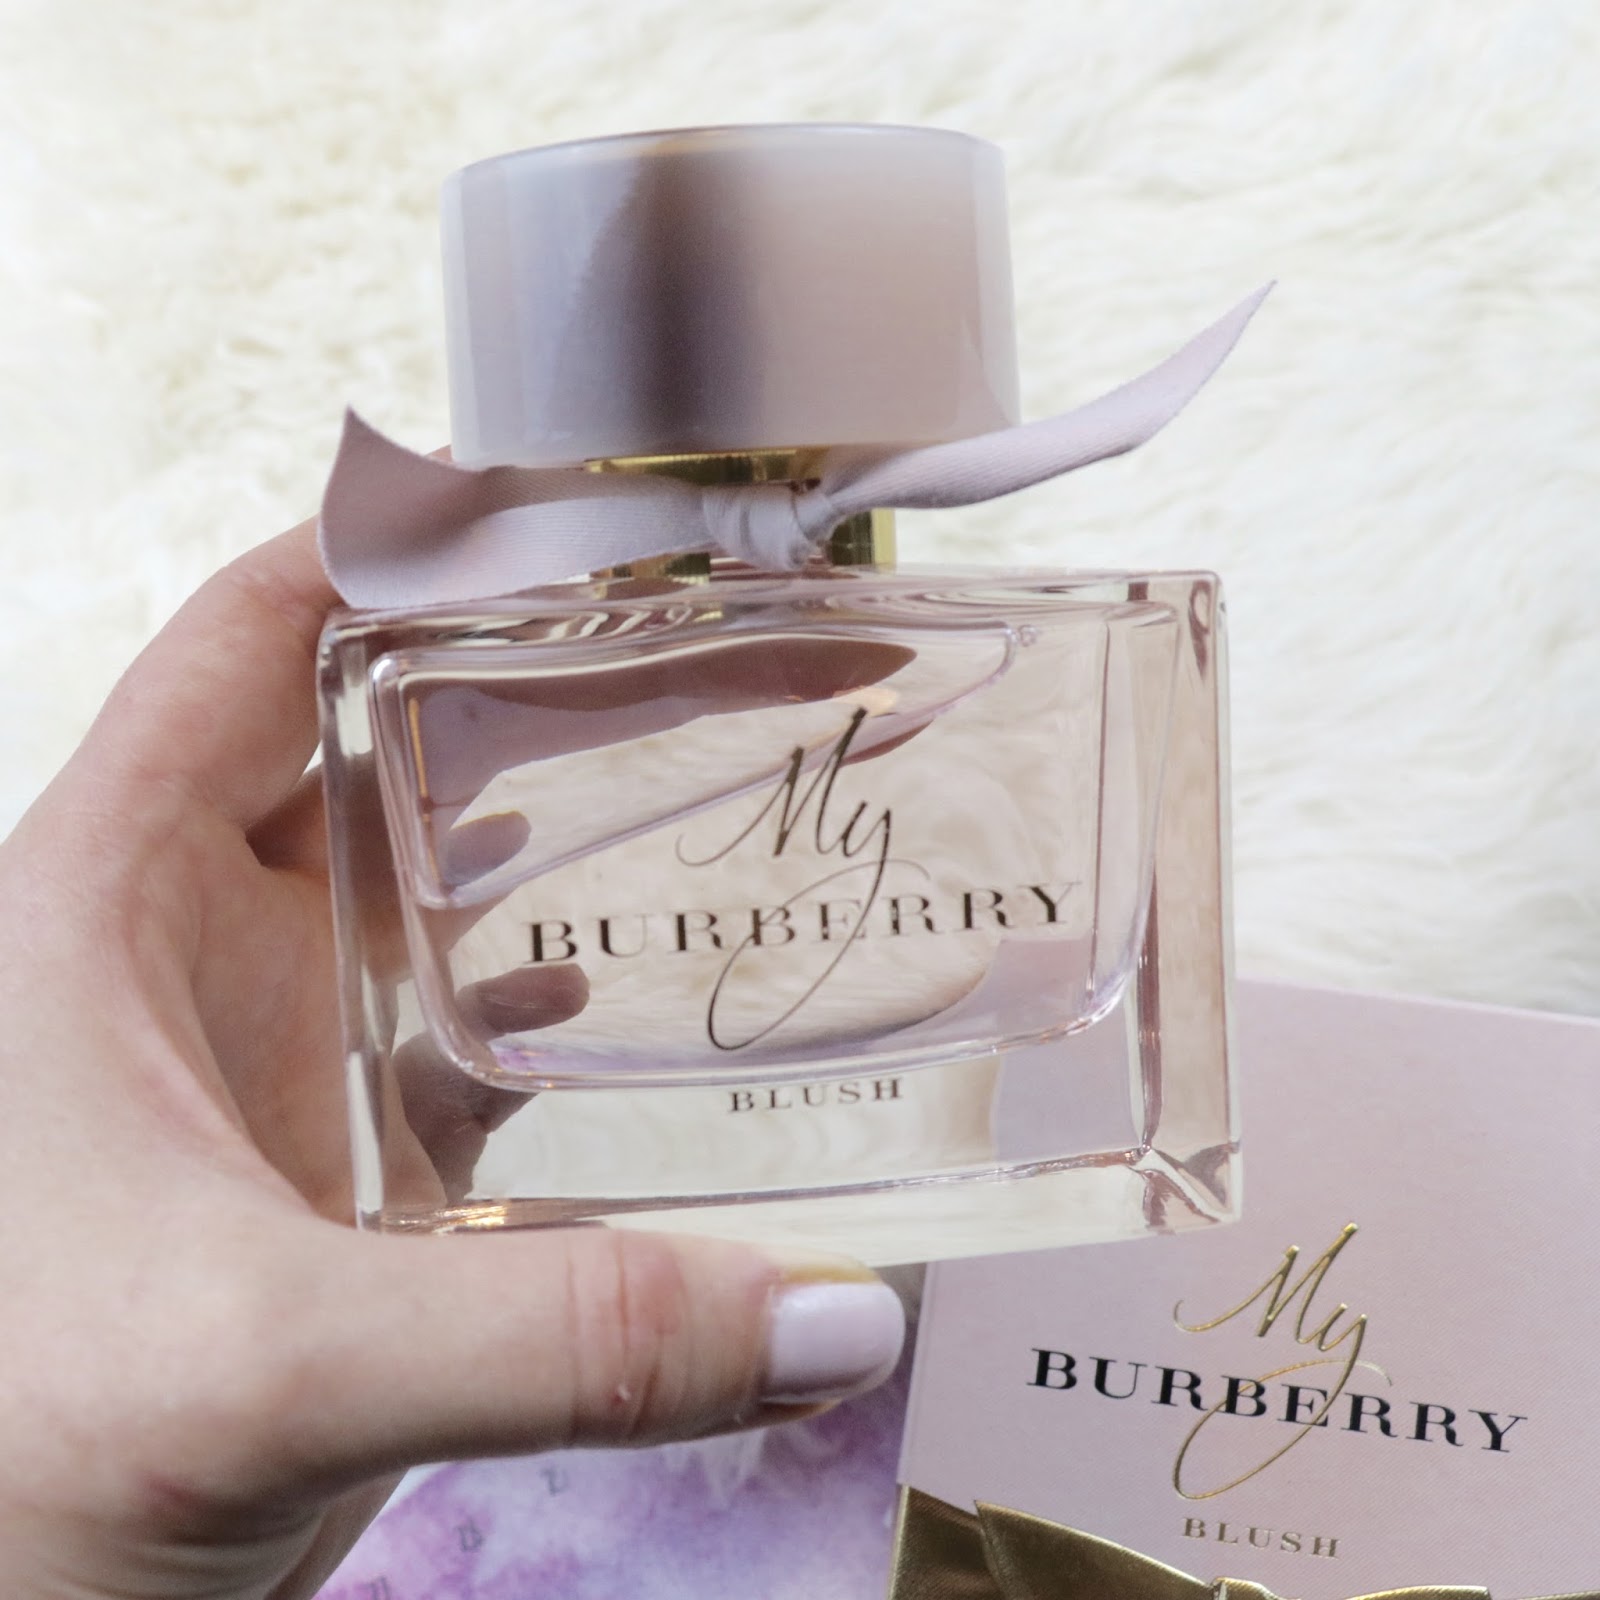 my burberry blush notes